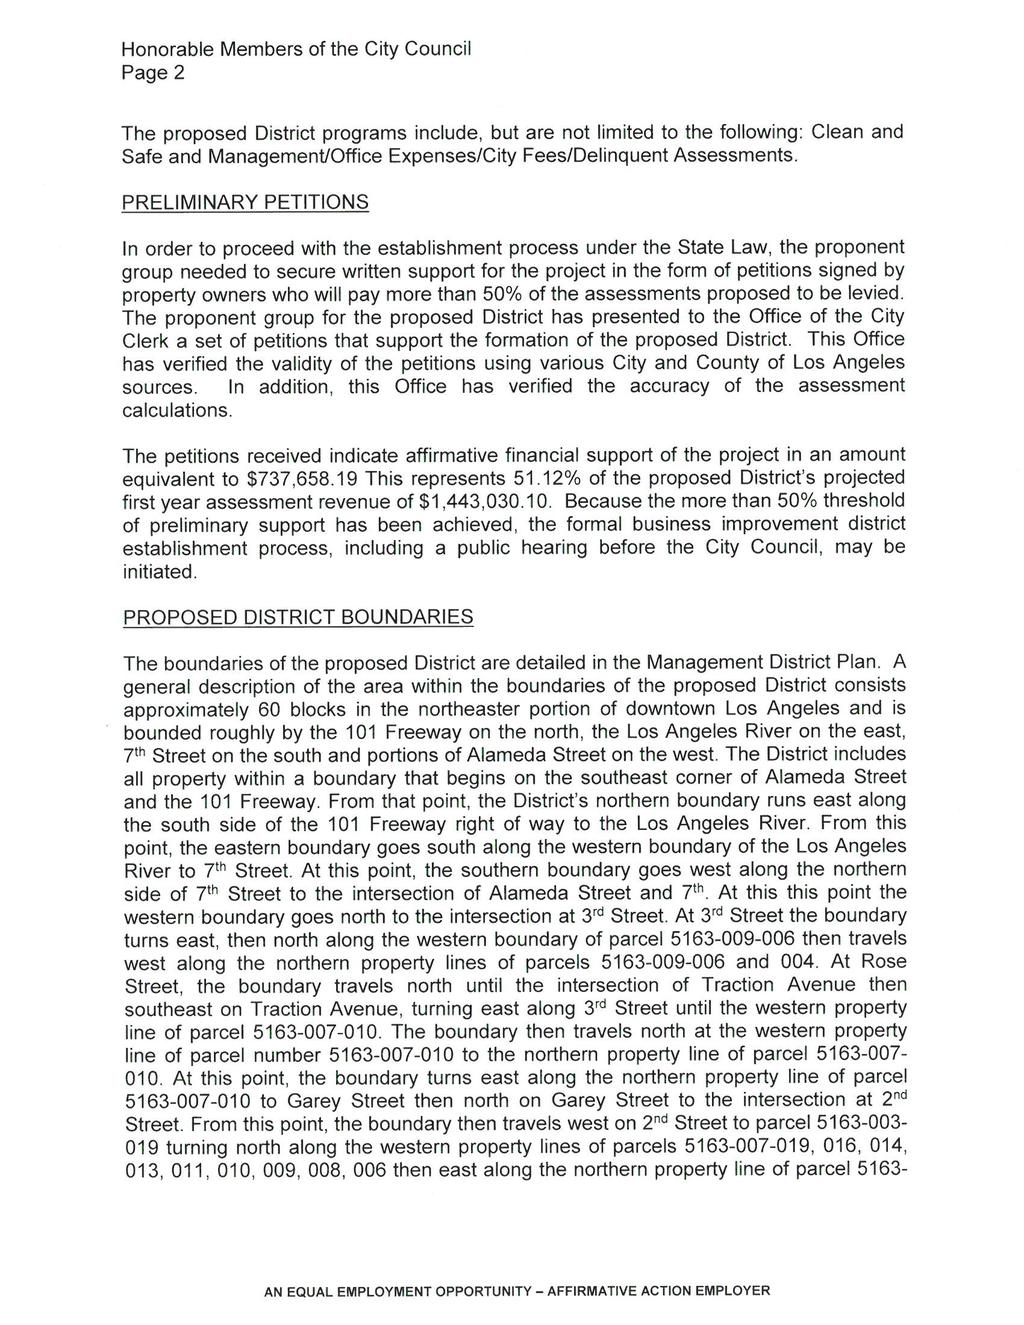 Page 2 The proposed District programs include, but are not limited to the following: Clean and Safe and Management/Office Expenses/City Fees/Delinquent Assessments.